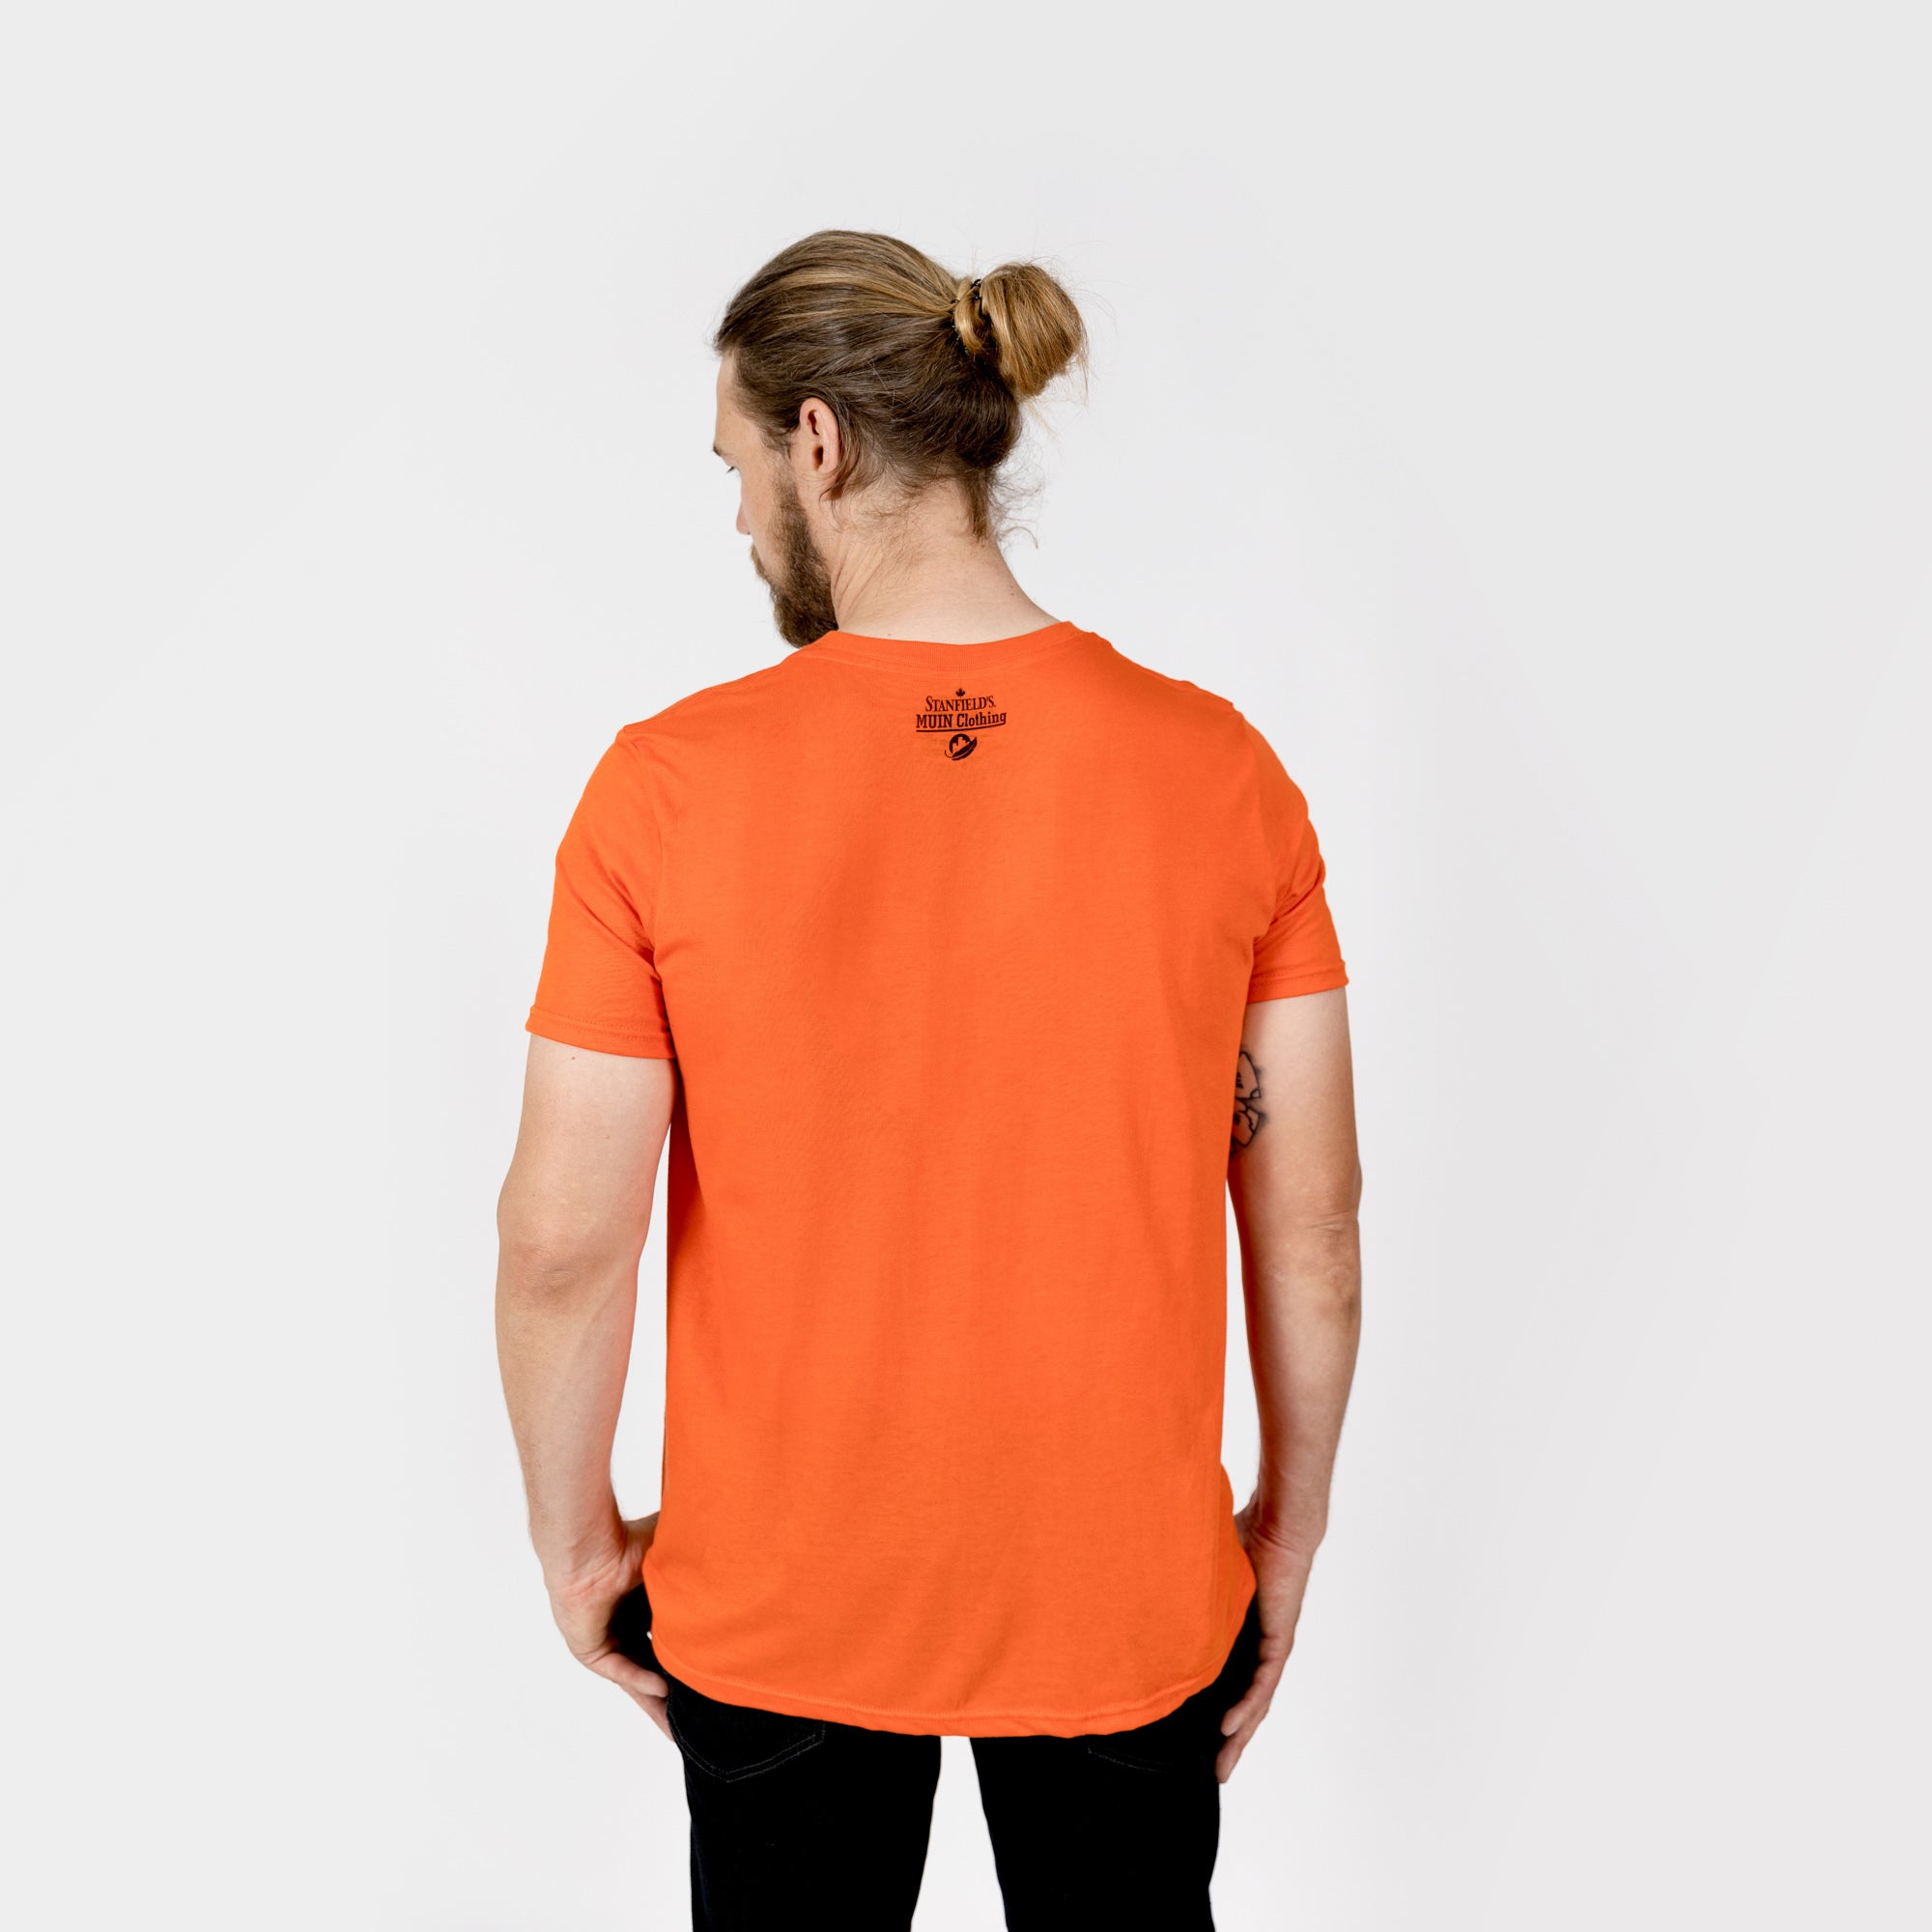 Muin X Stanfield's Adult Orange T-Shirt - EVERY CHILD MATTERS  "FEATHERS"